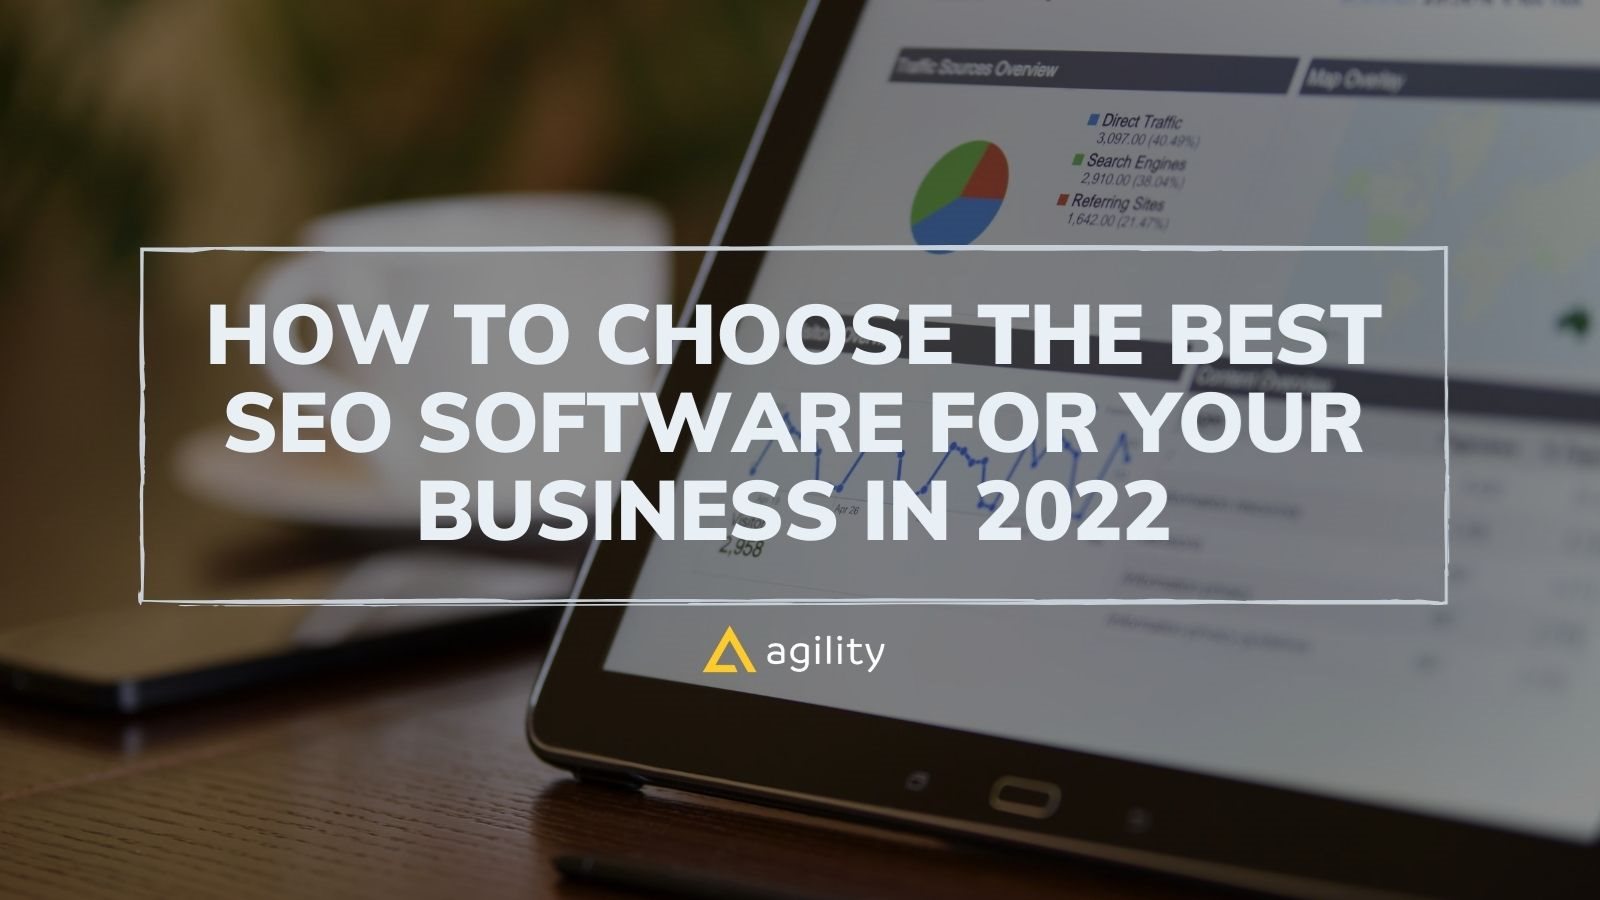 How to Choose the Best SEO Software for Your Business in 2022